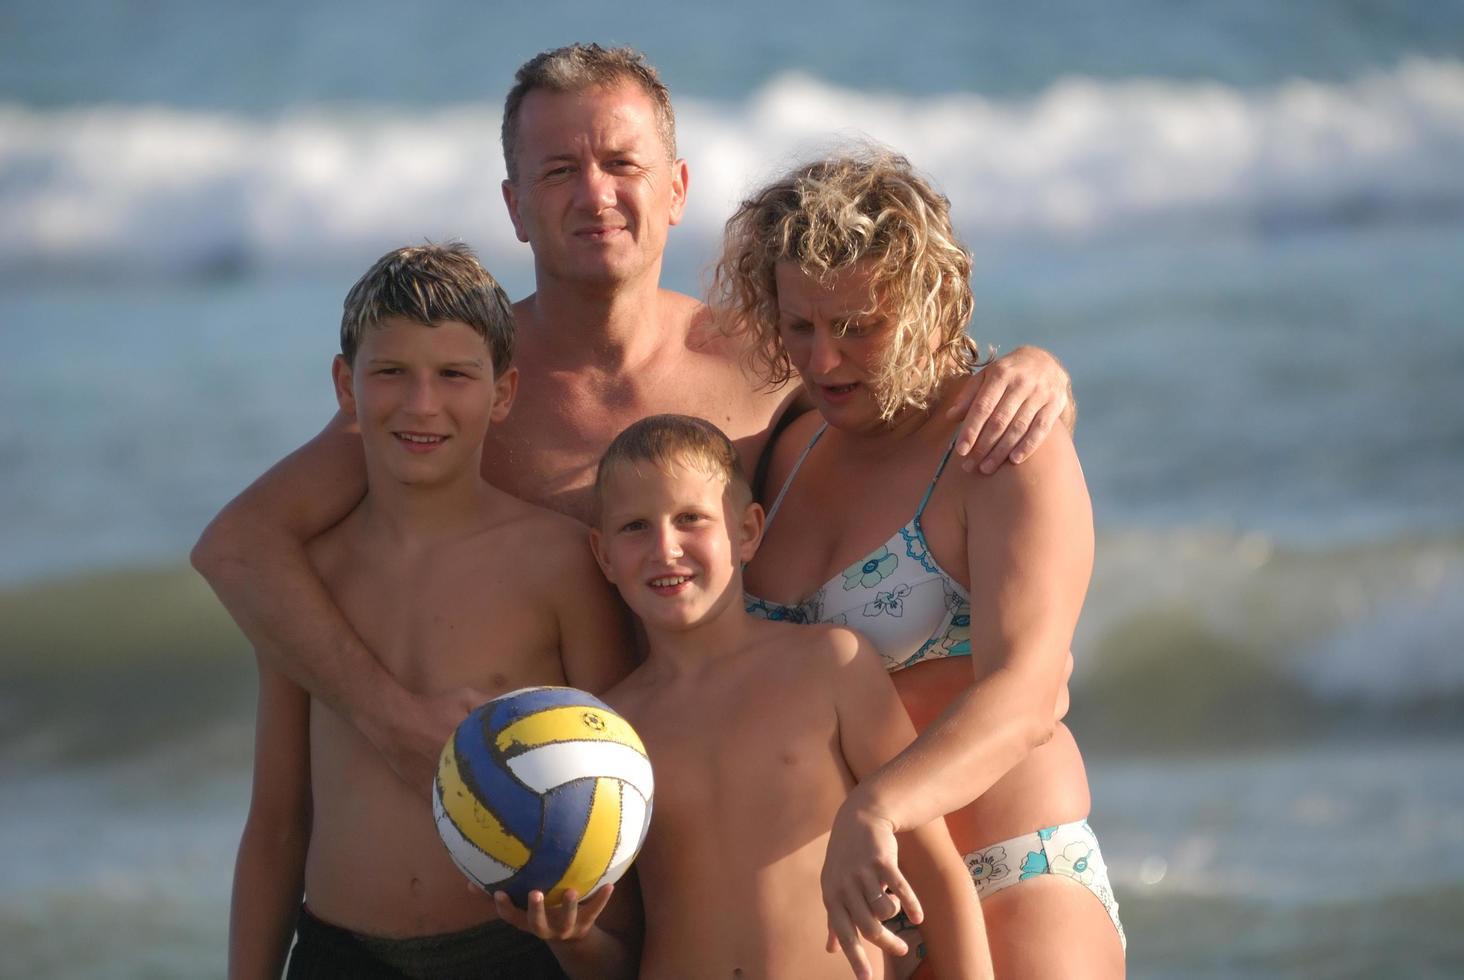 family portrait on beach at summer holidays photo